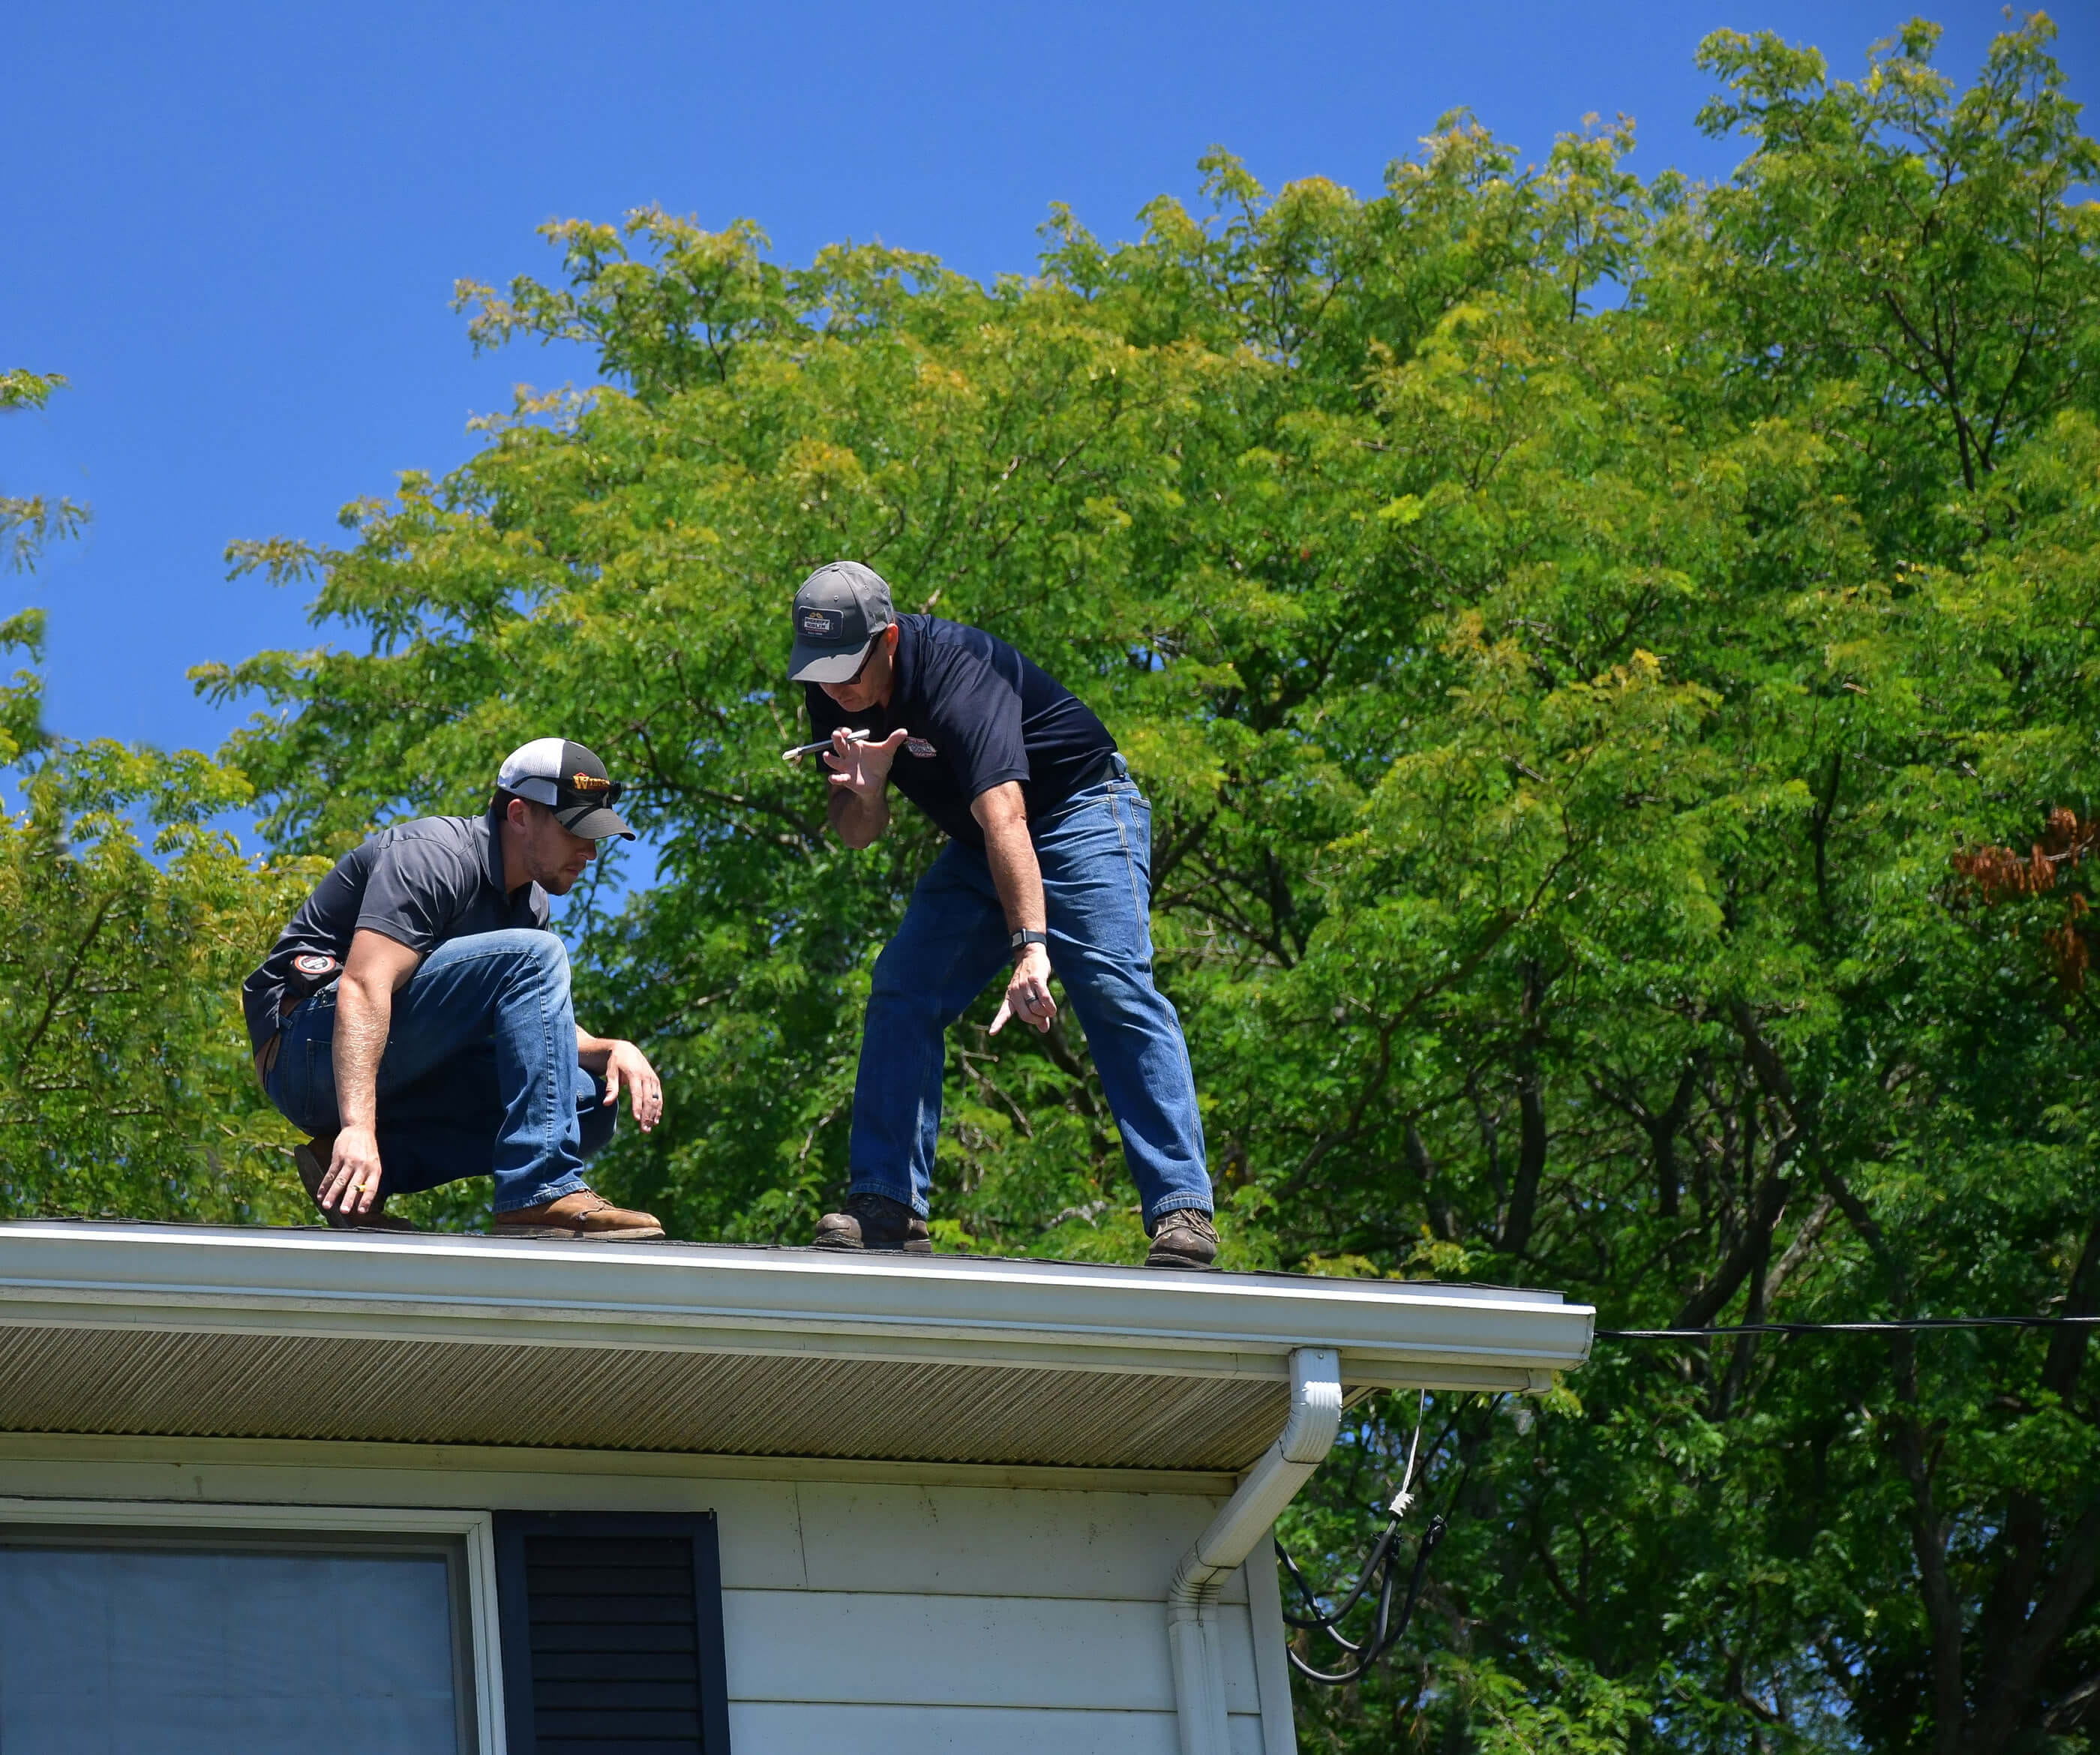 Roof Installation & Roof Repair in Orlando, FL | 1906 Roofing - Inspection2